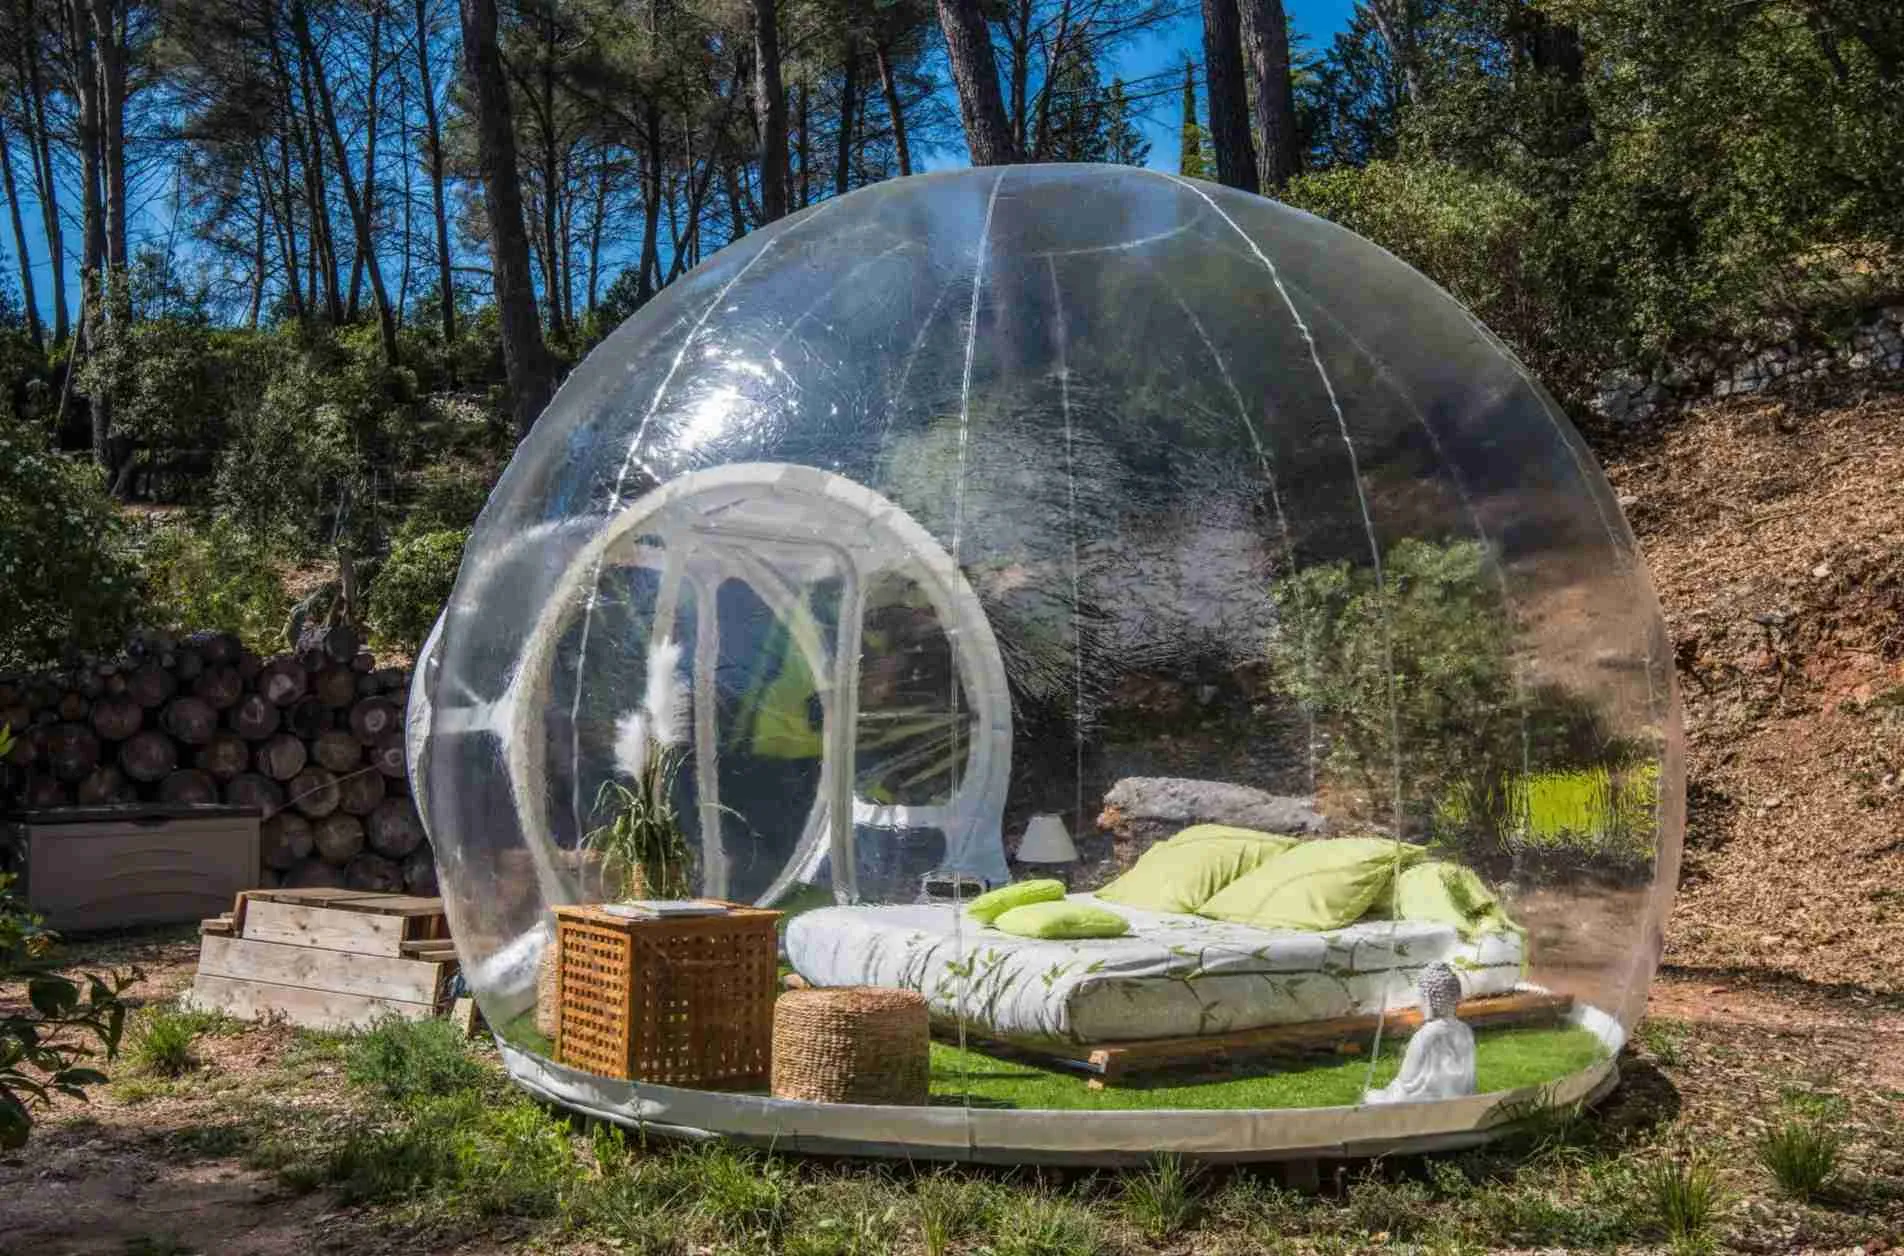 Free Blower Inflatable Bubble House 4M Dia Bubble Hotel For Outdoor Camping Transparent Igloo Tent Bubble Tree Dome Tent House